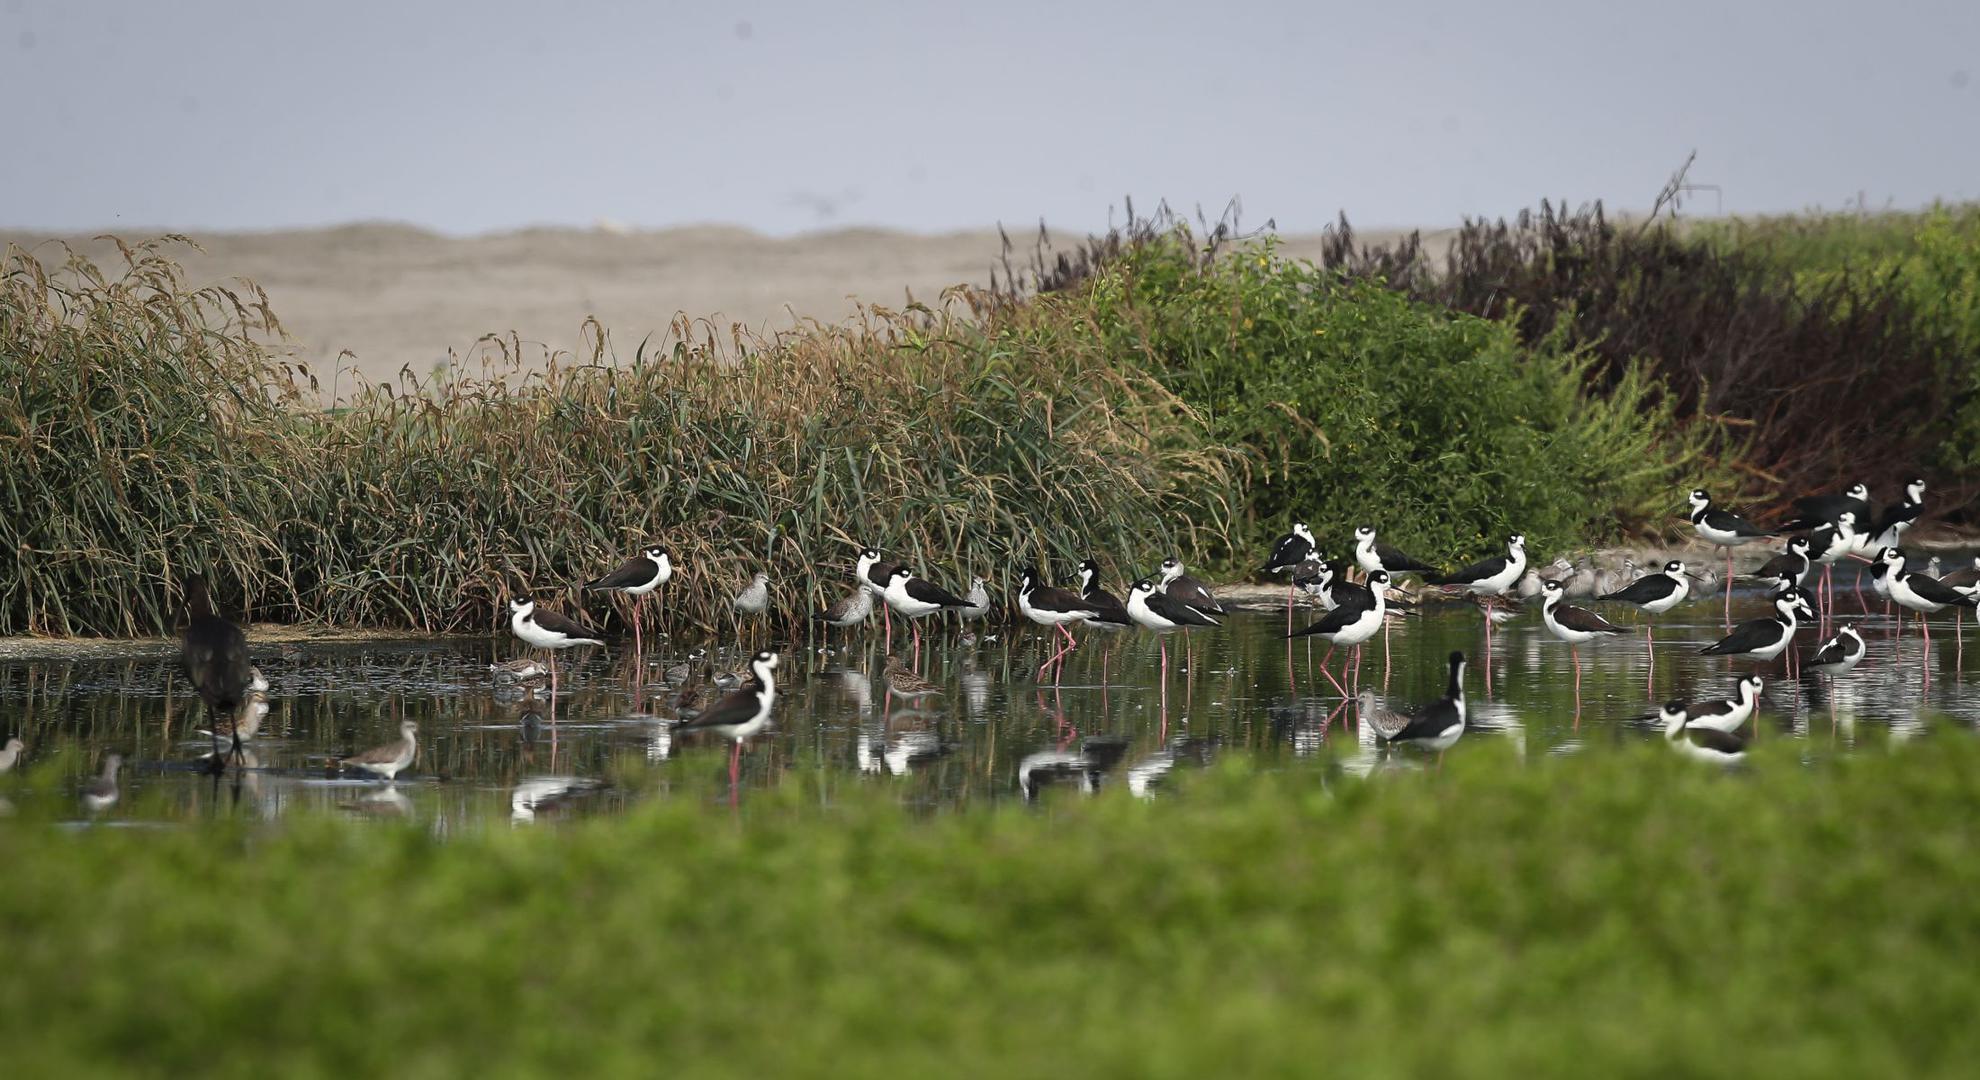 For animals, wetlands provide food and shelter, breeding grounds, and, in the case of migratory birds, resting places.  In the picture, a group of black-necked stilts.